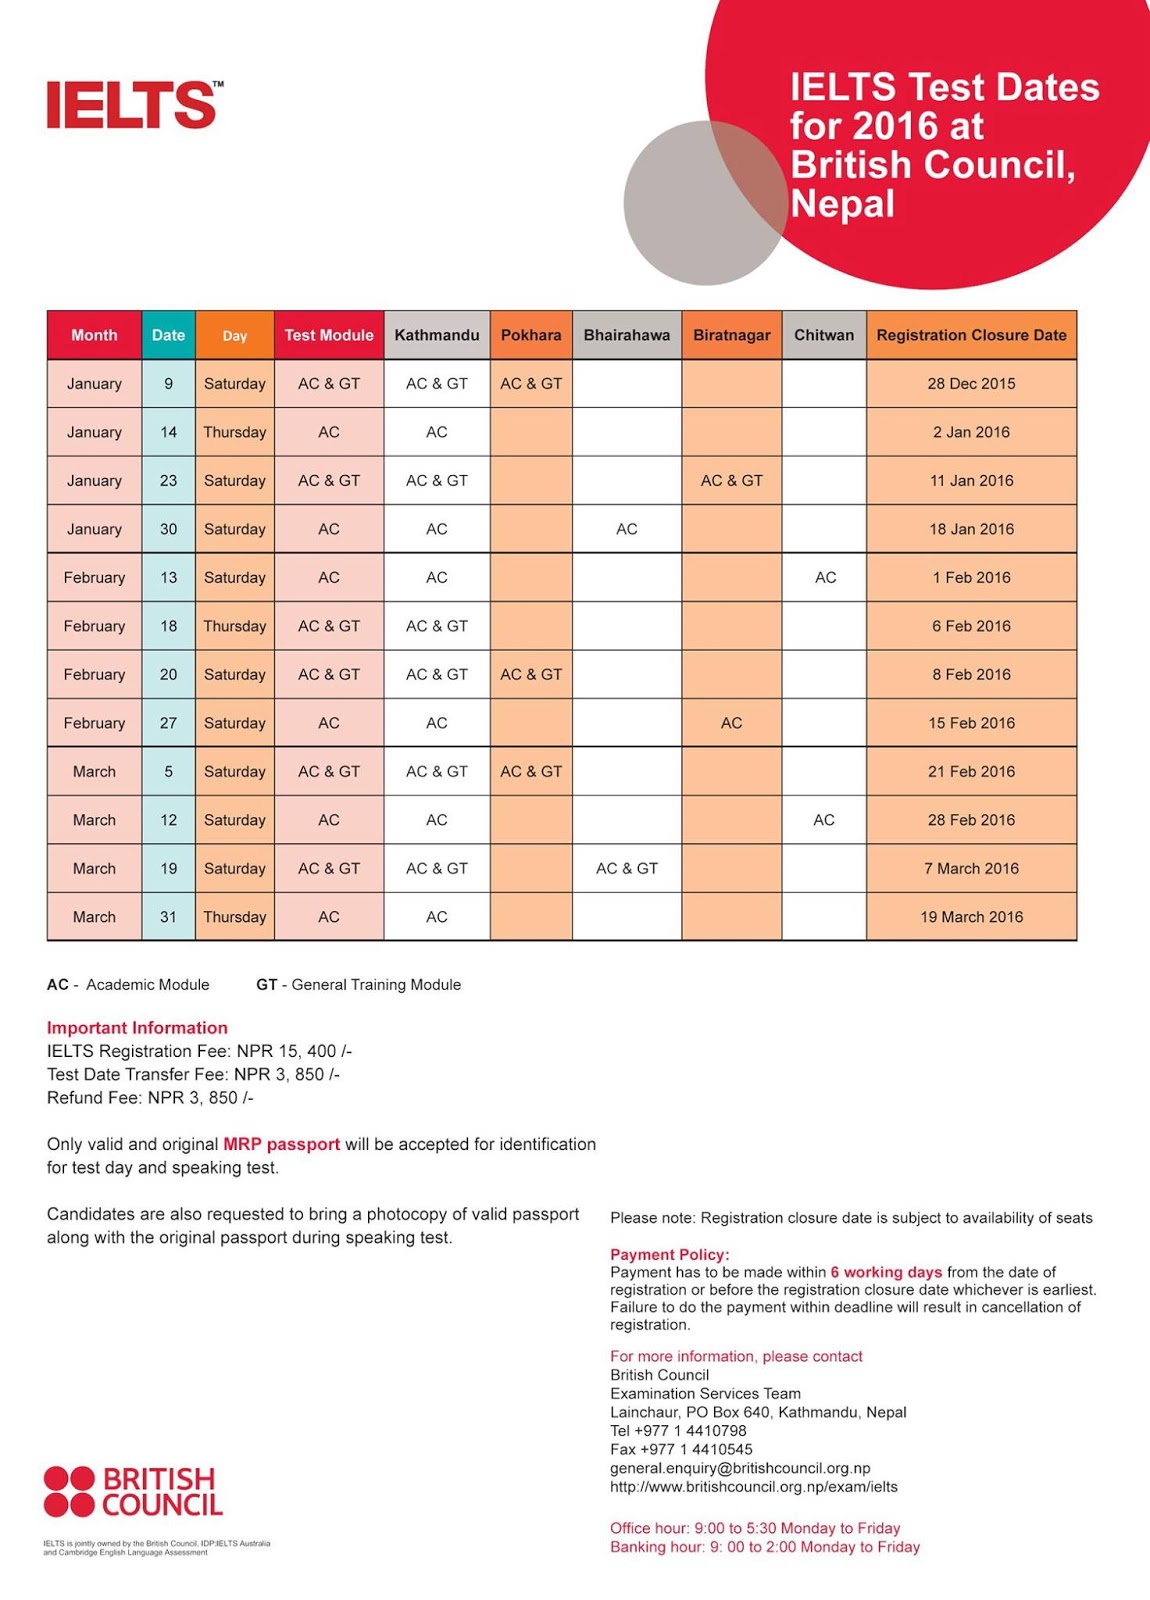 ielts-exam-dates-where-amp-when-can-you-take-your-test-ielts-jacky-pelajaran